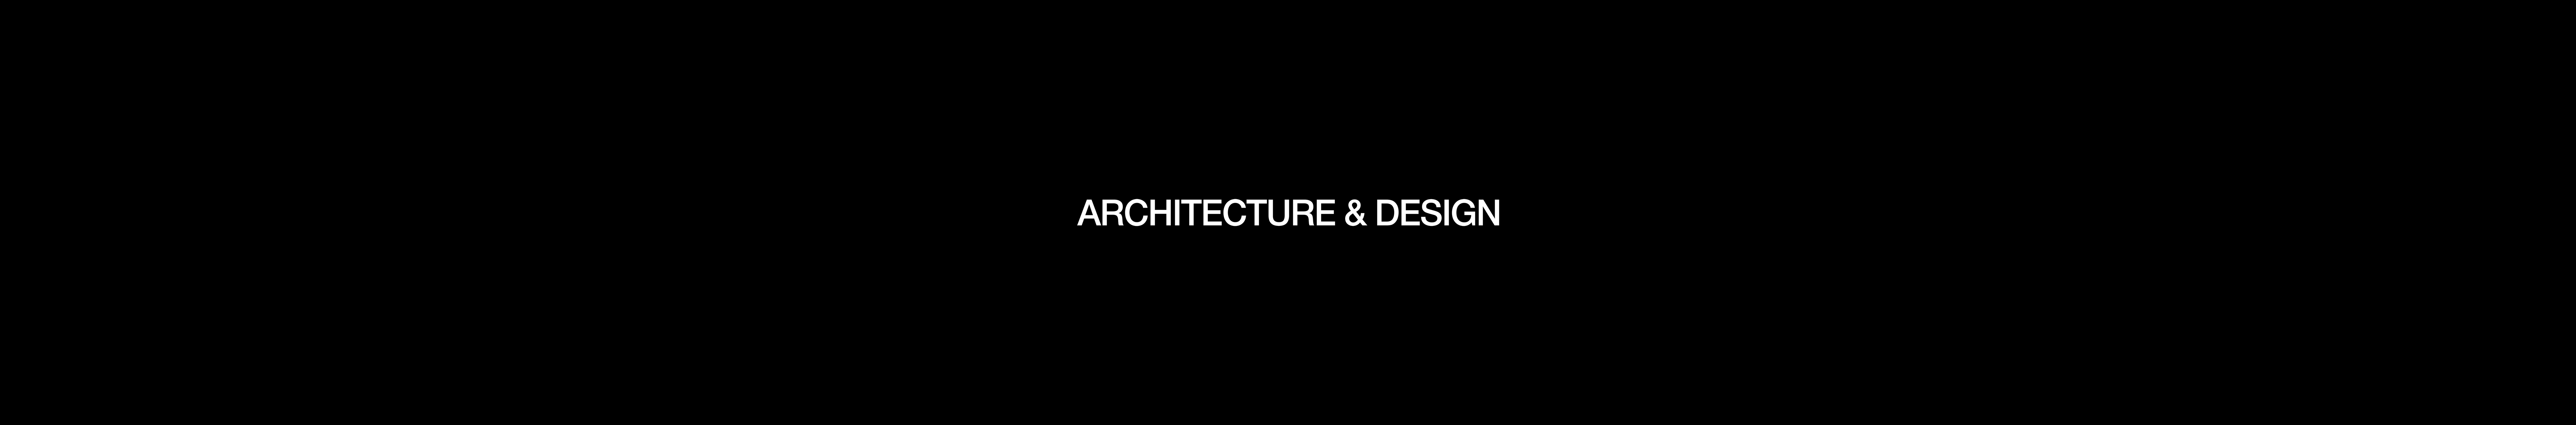 ONEHOUSE ARCHITECTS's profile banner